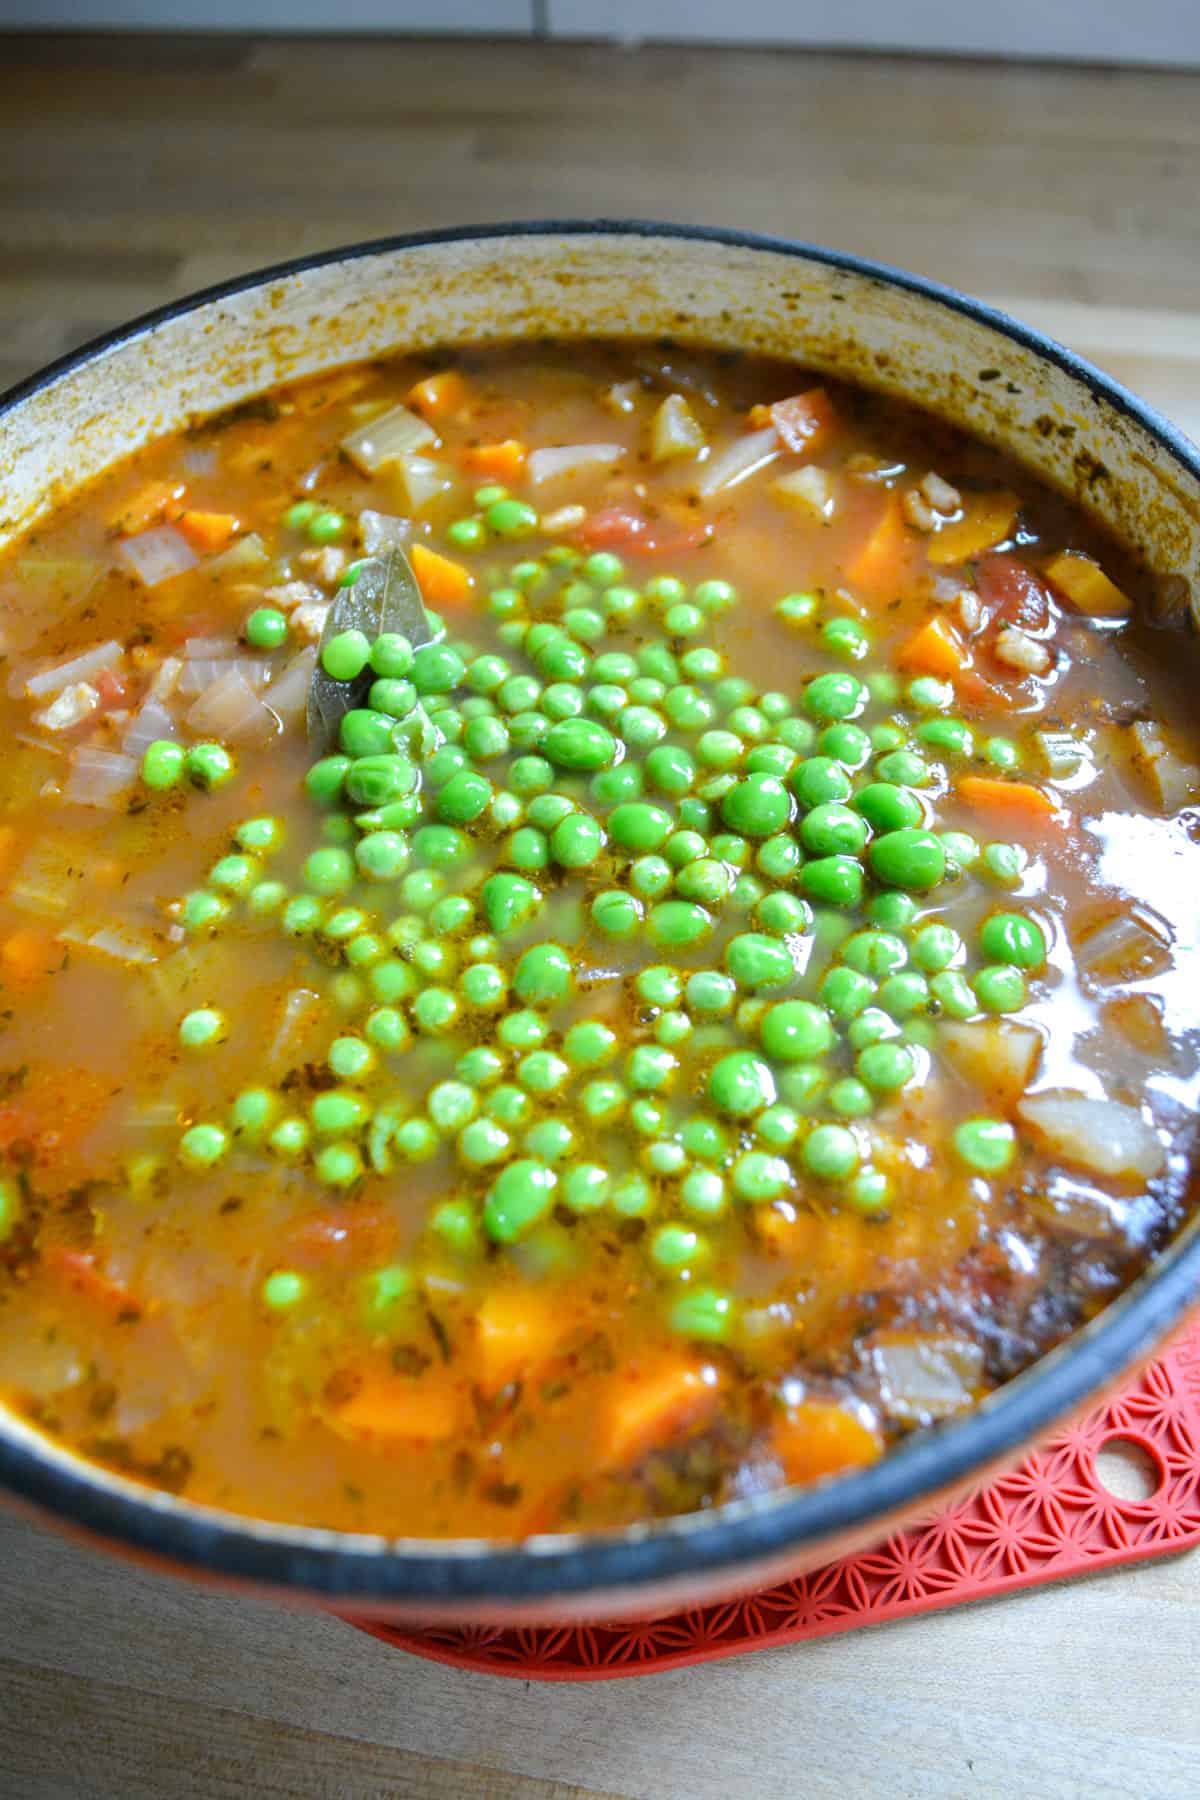 Peas added in to the finished vegan barley stew.